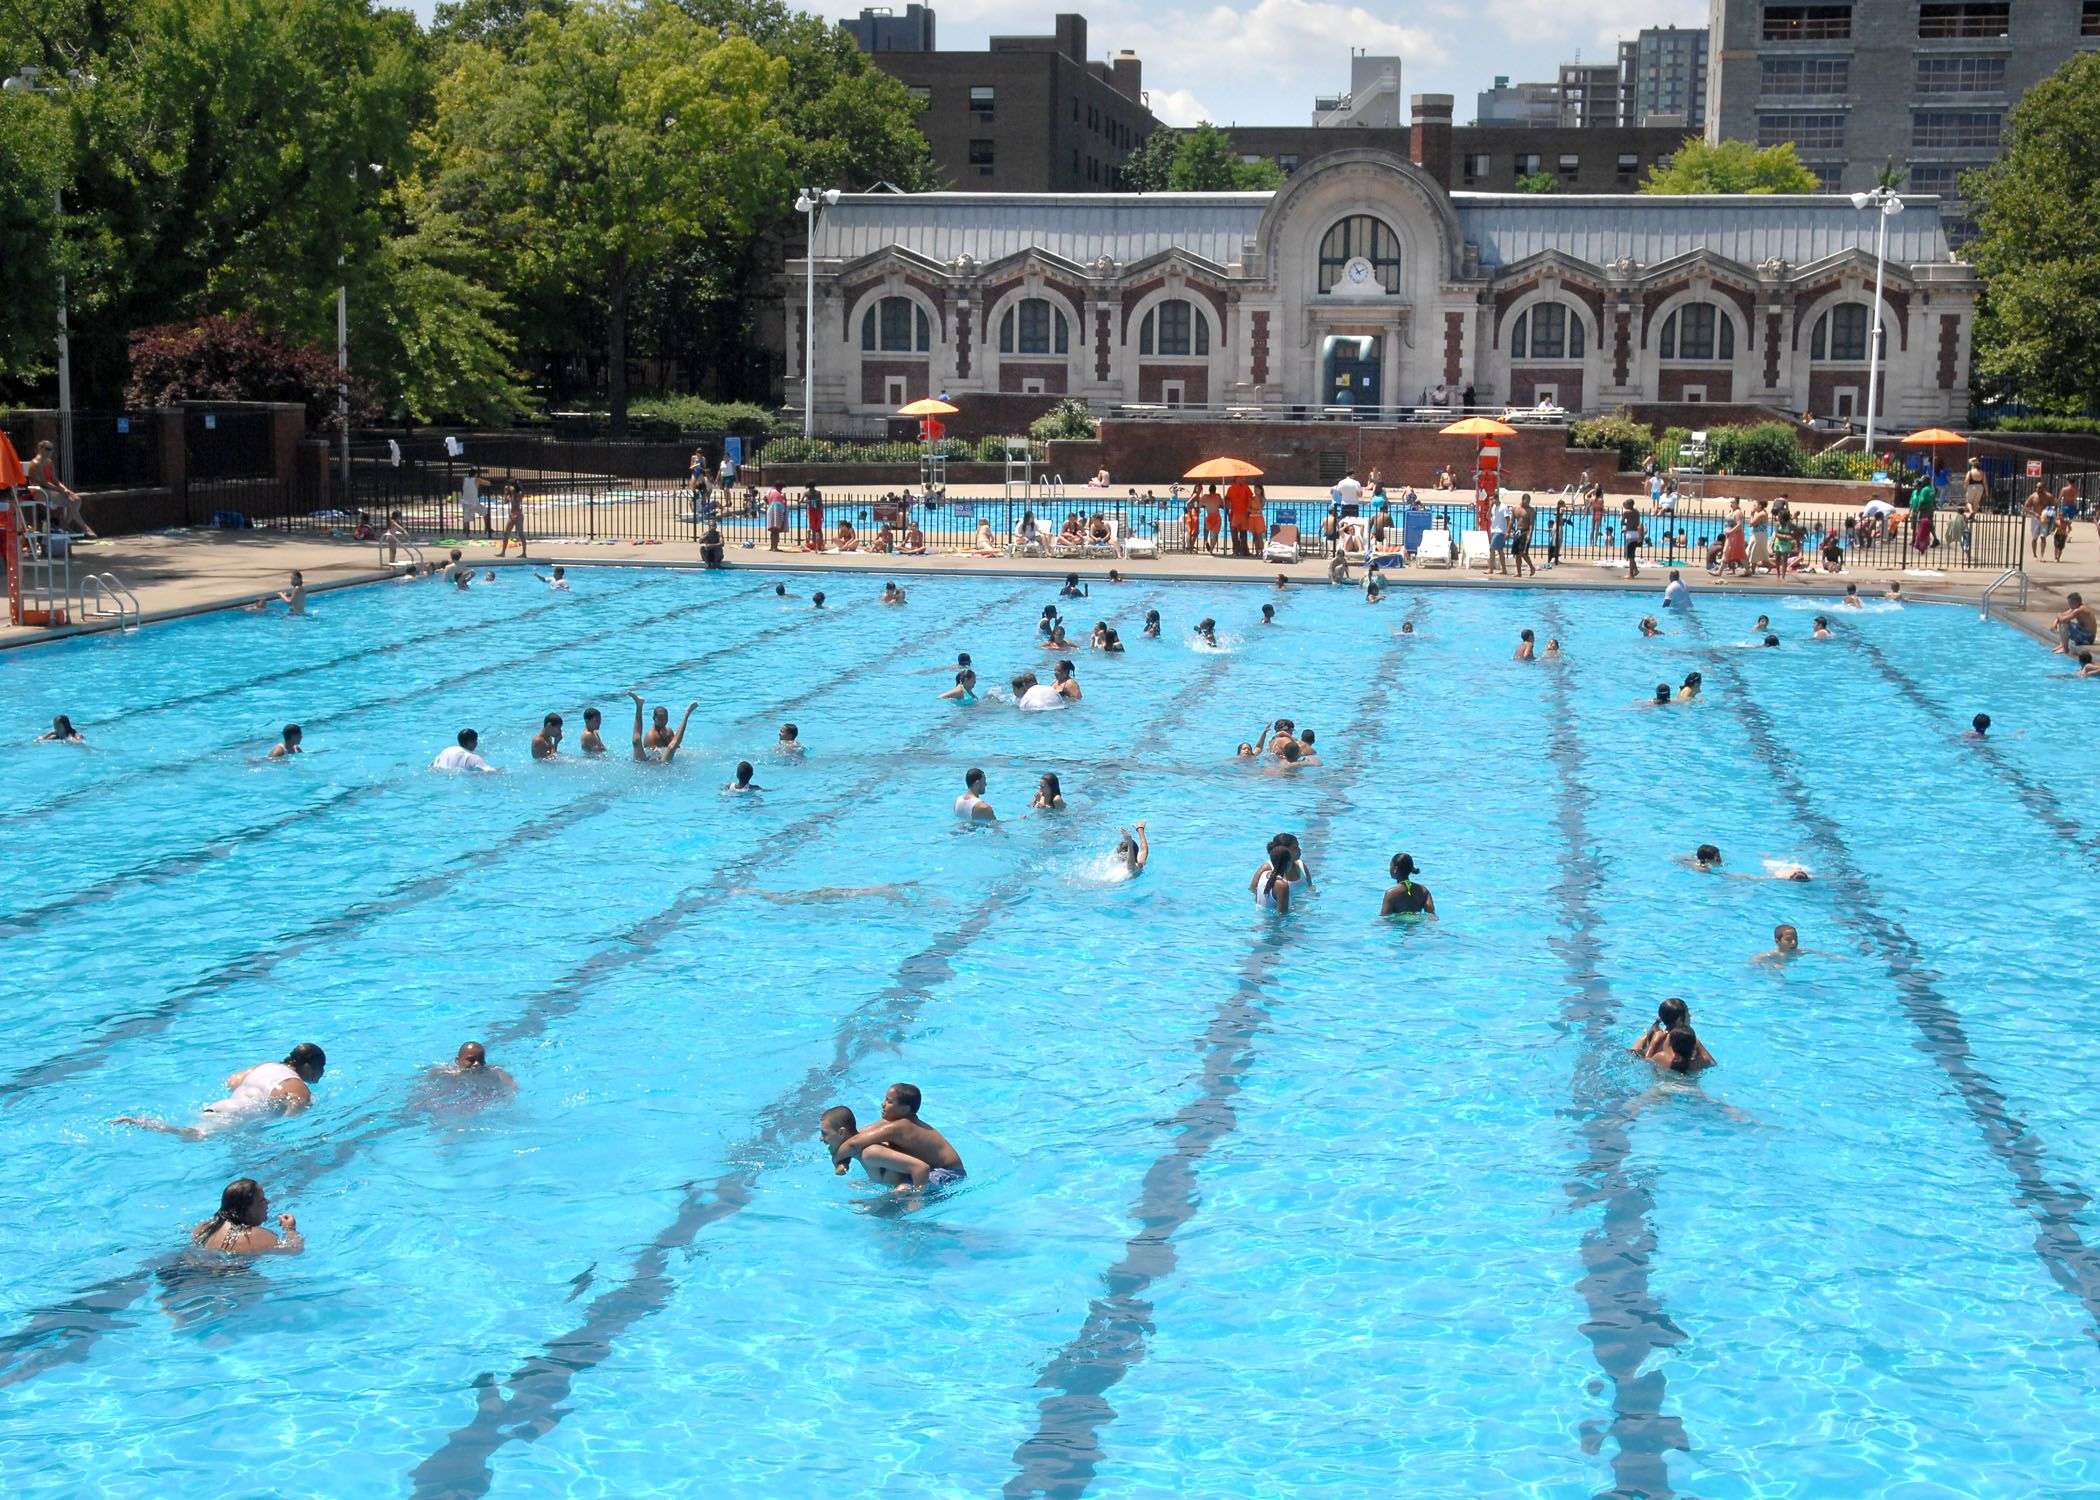 Free Outdoor Public Pools in NYC